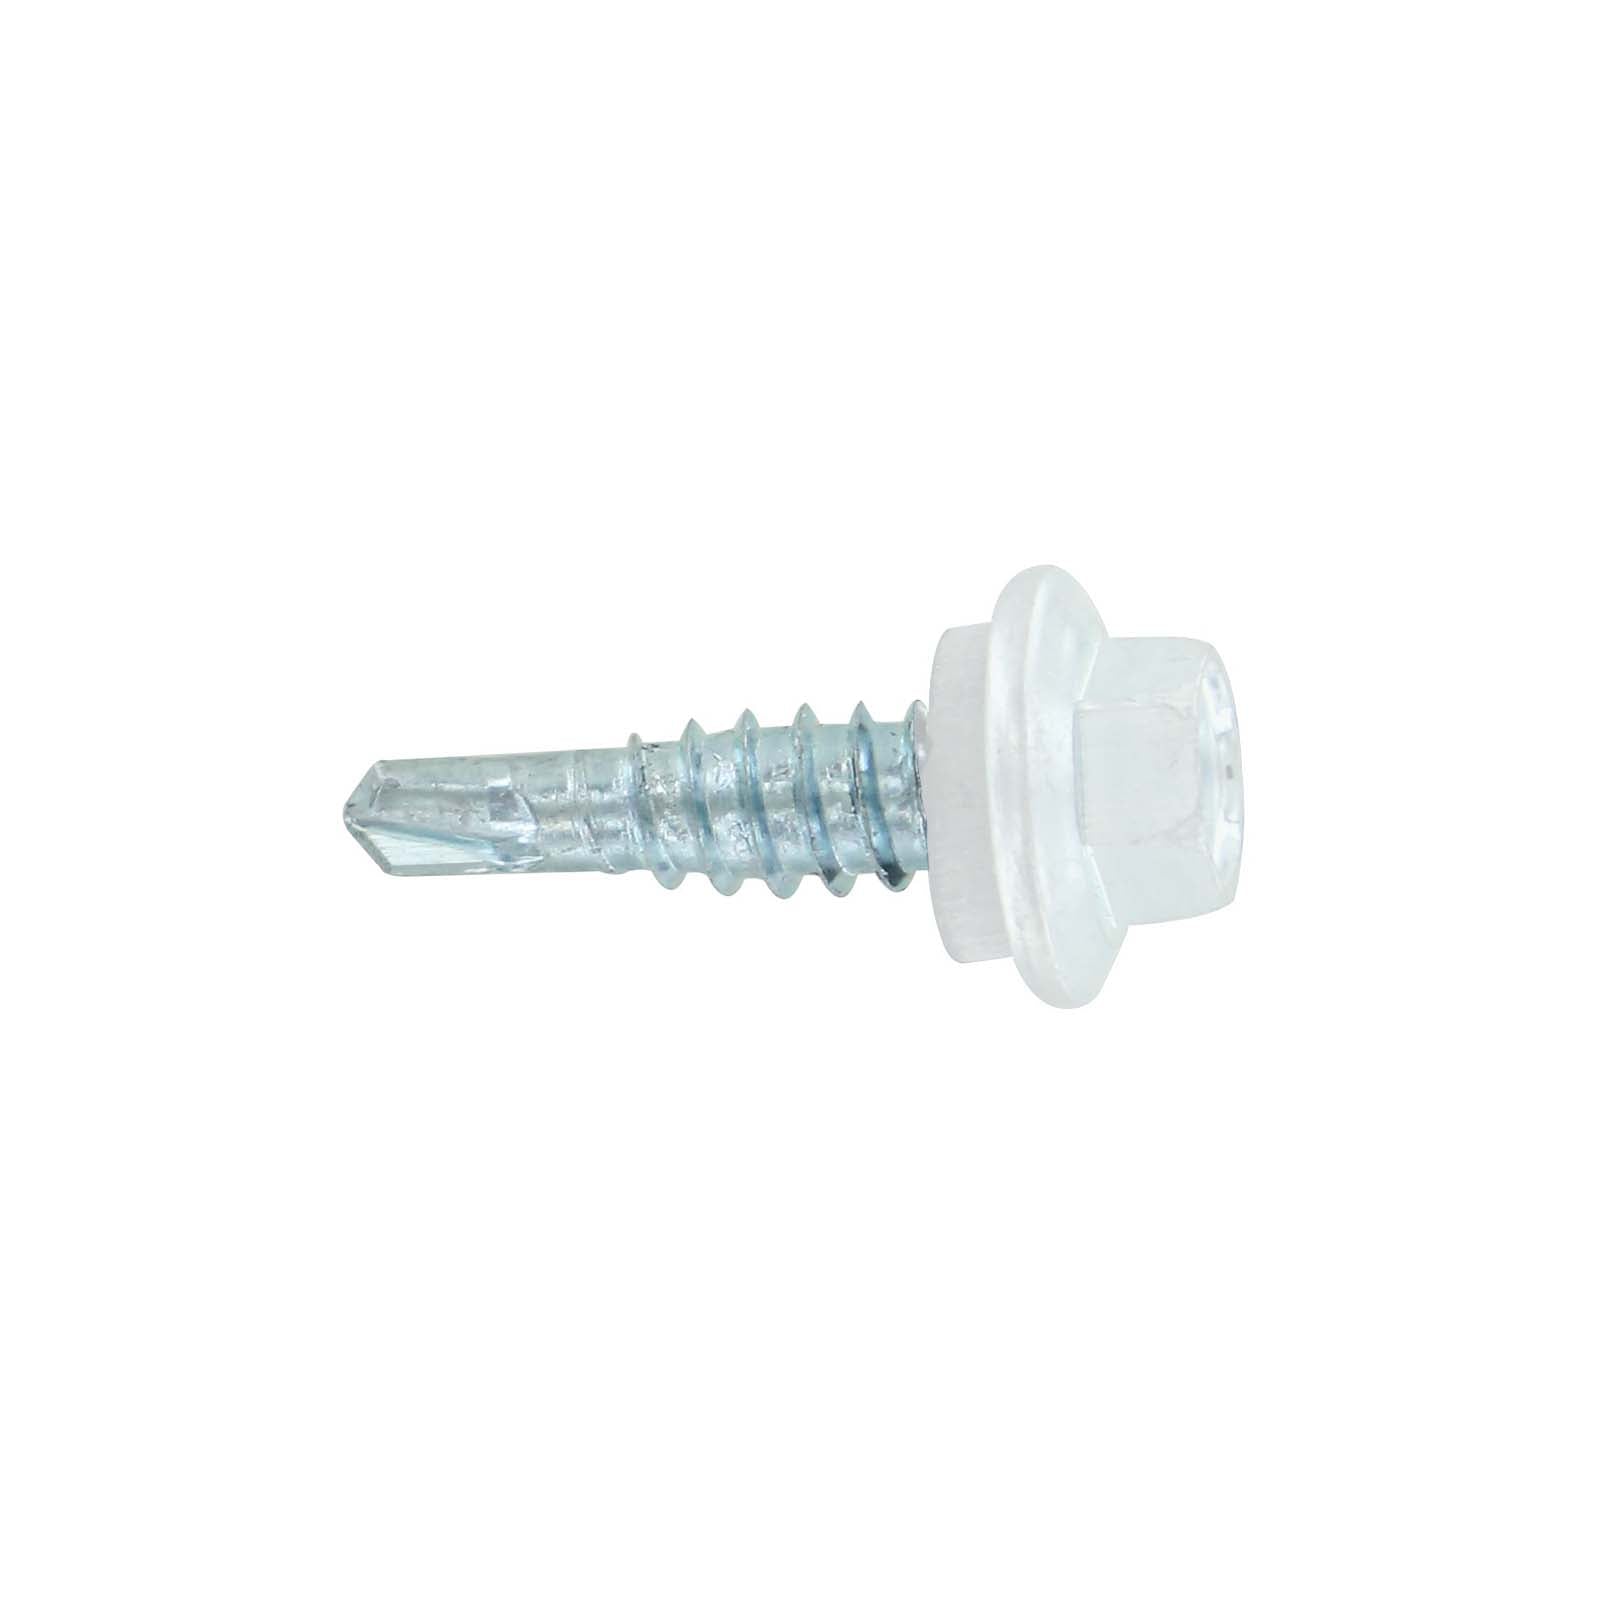 Industrial Strength Heavy-Duty Fasteners, 2 x 25 ft, White